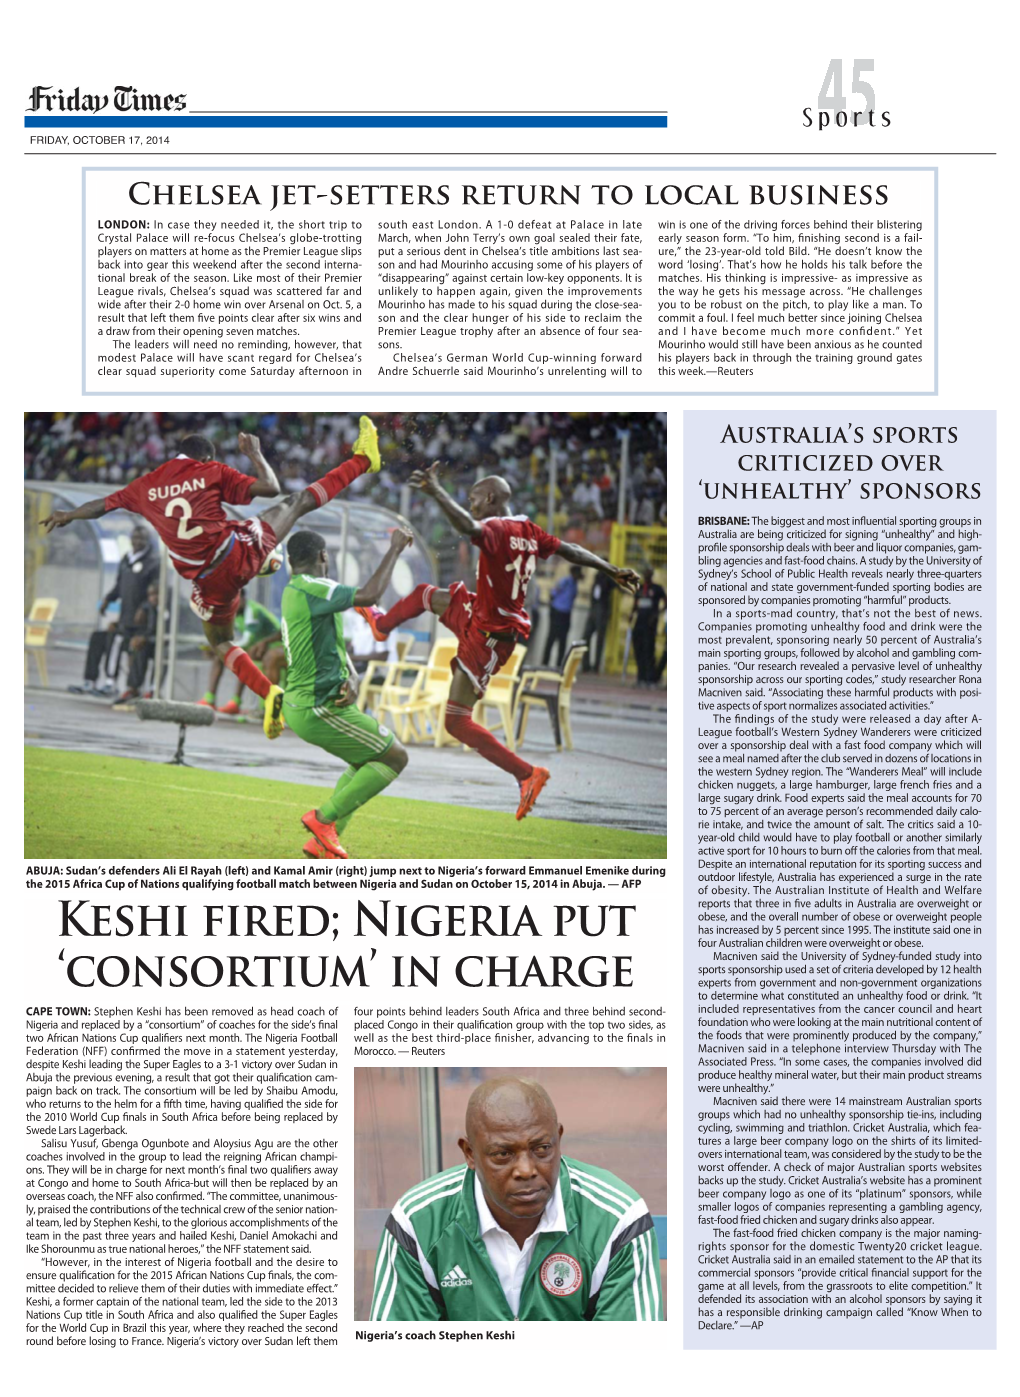 Keshi Fired; Nigeria Put Has Increased by 5 Percent Since 1995